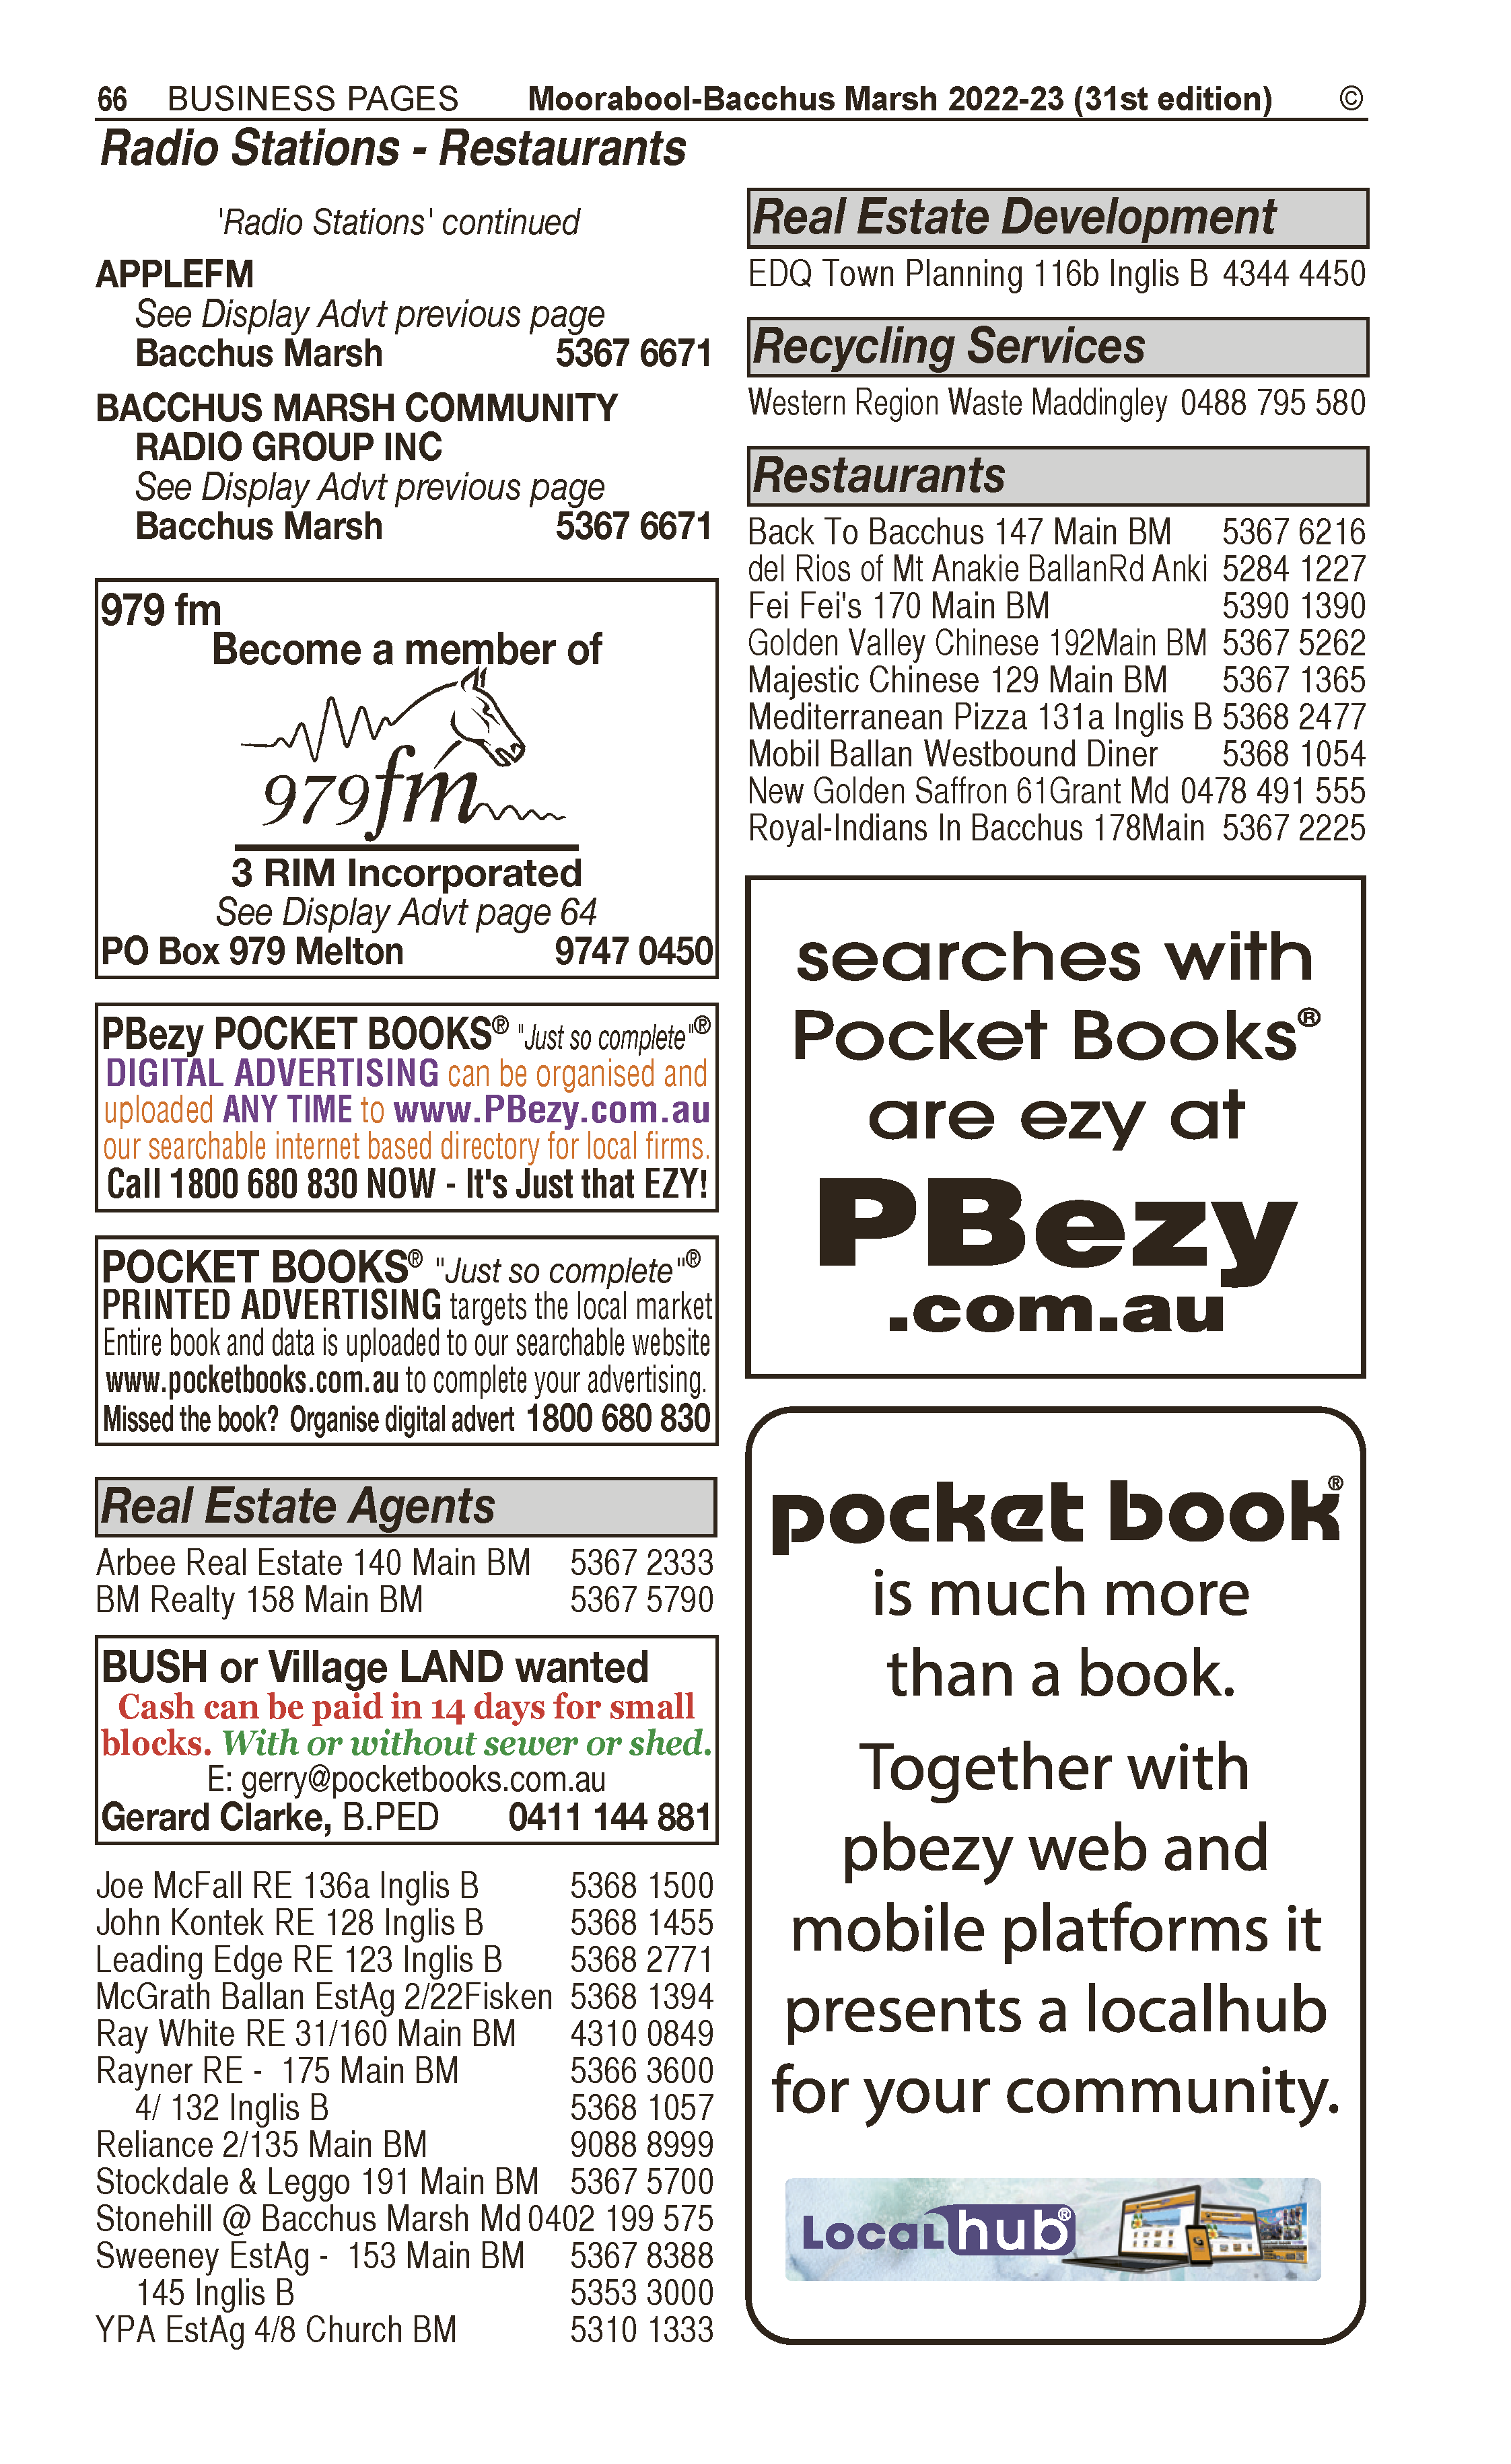 979fm 3RIM Incorporated | Radio Stations in Melton | PBezy Pocket Books local directories - page 66